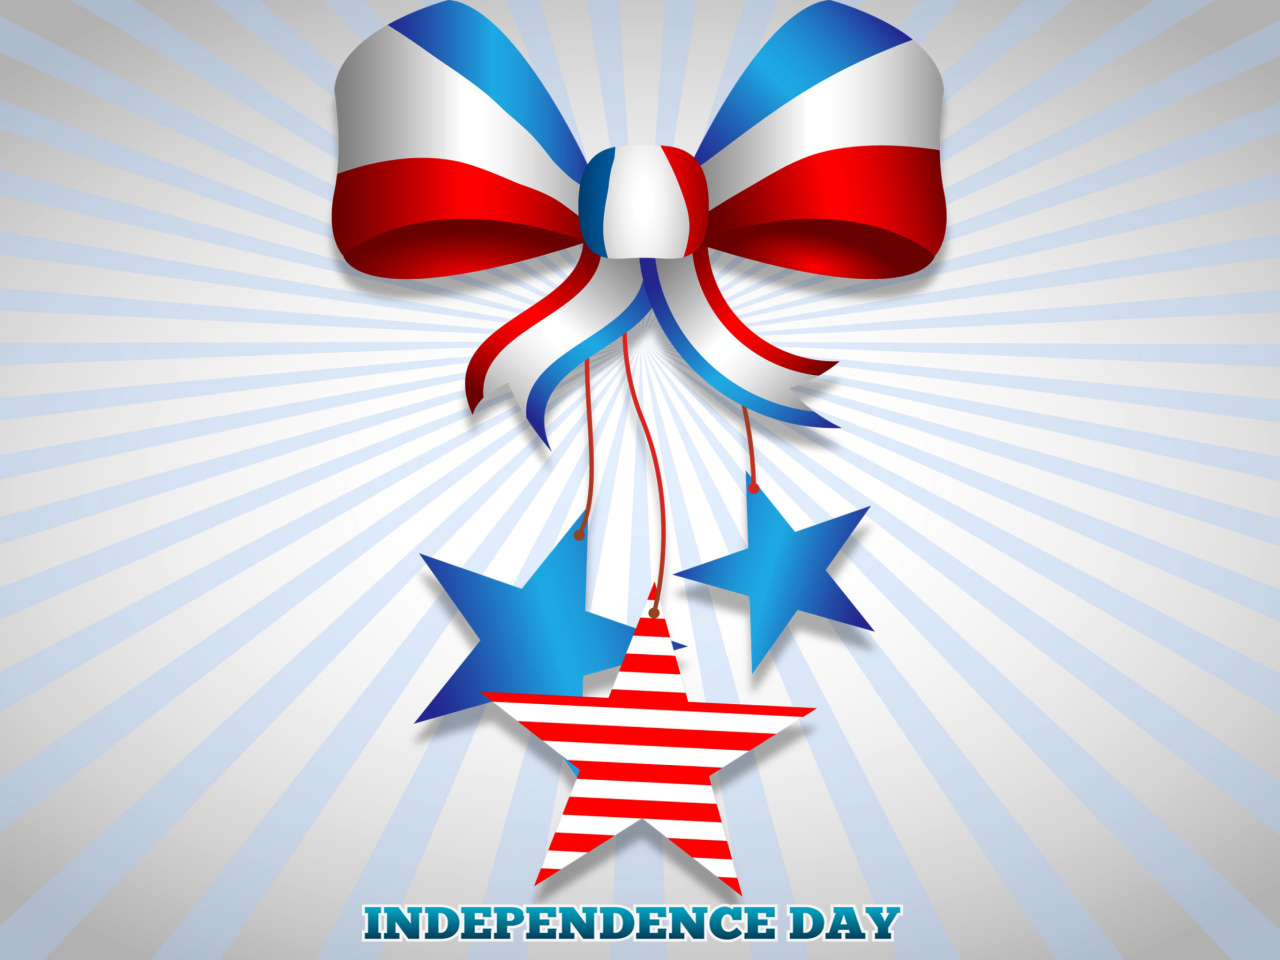 Das United states america Idependence day 4th july Wallpaper 1280x960